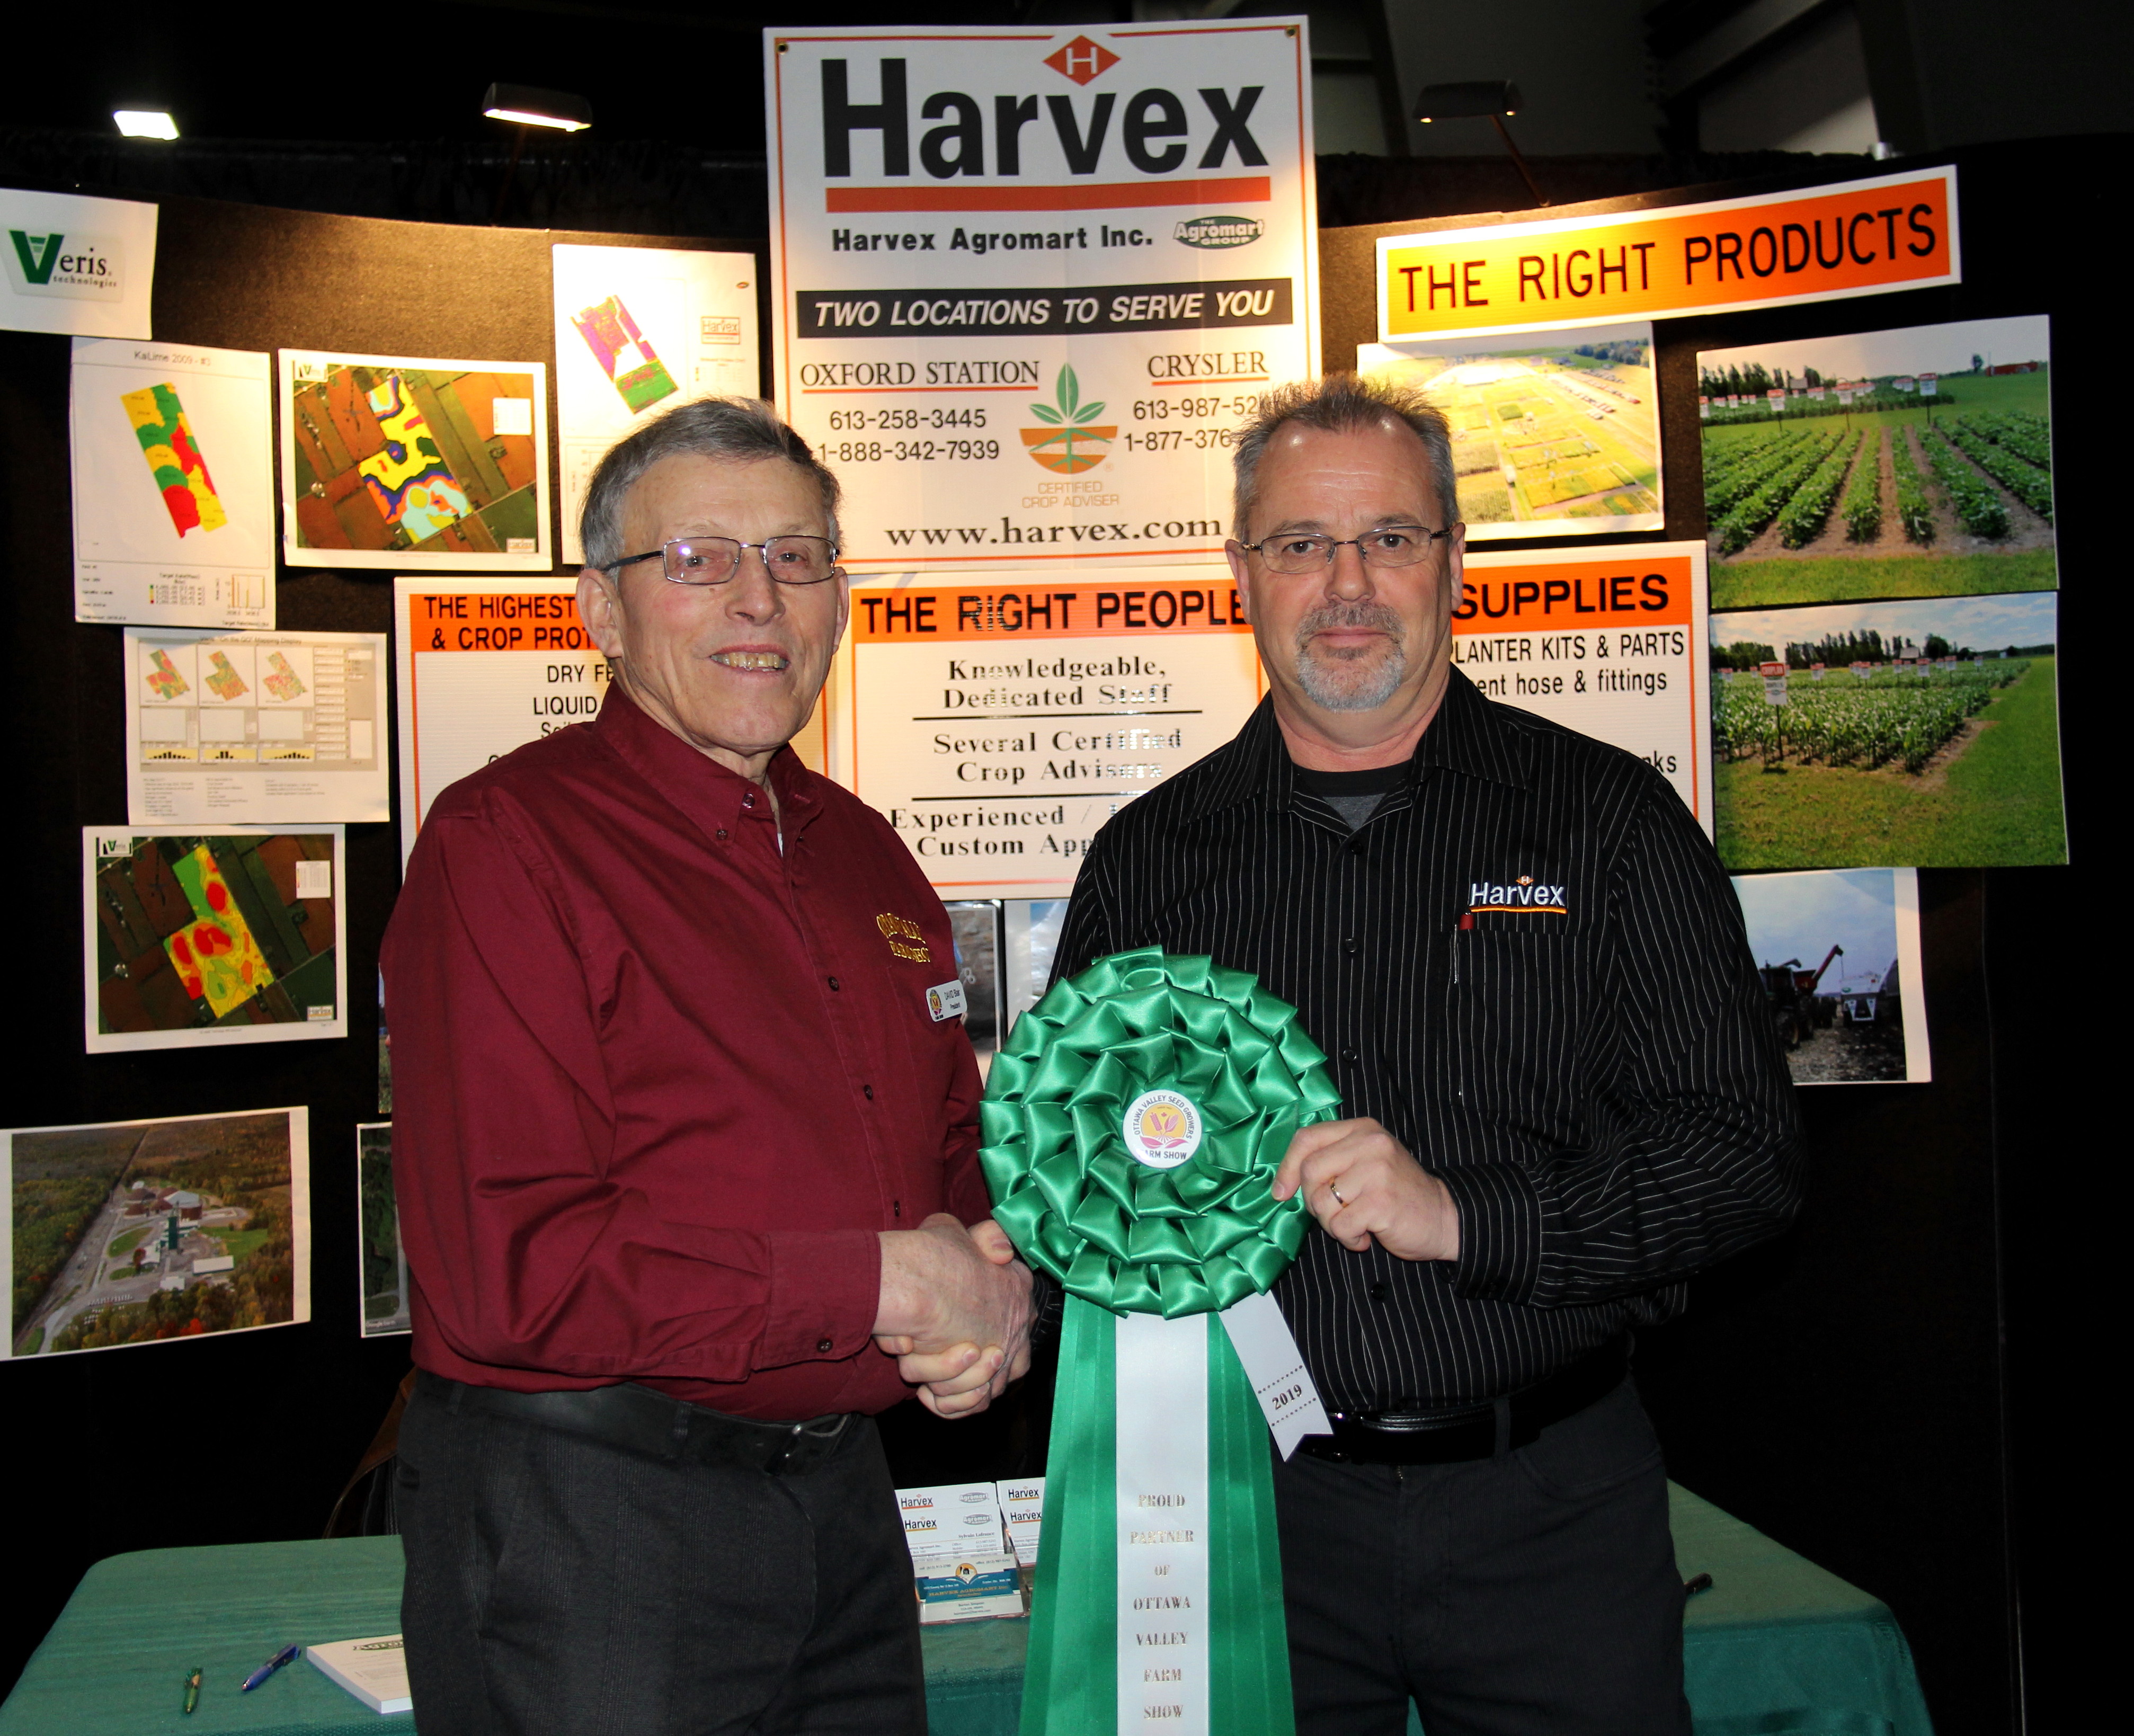 Two men are shaking hands over a green ribbon.